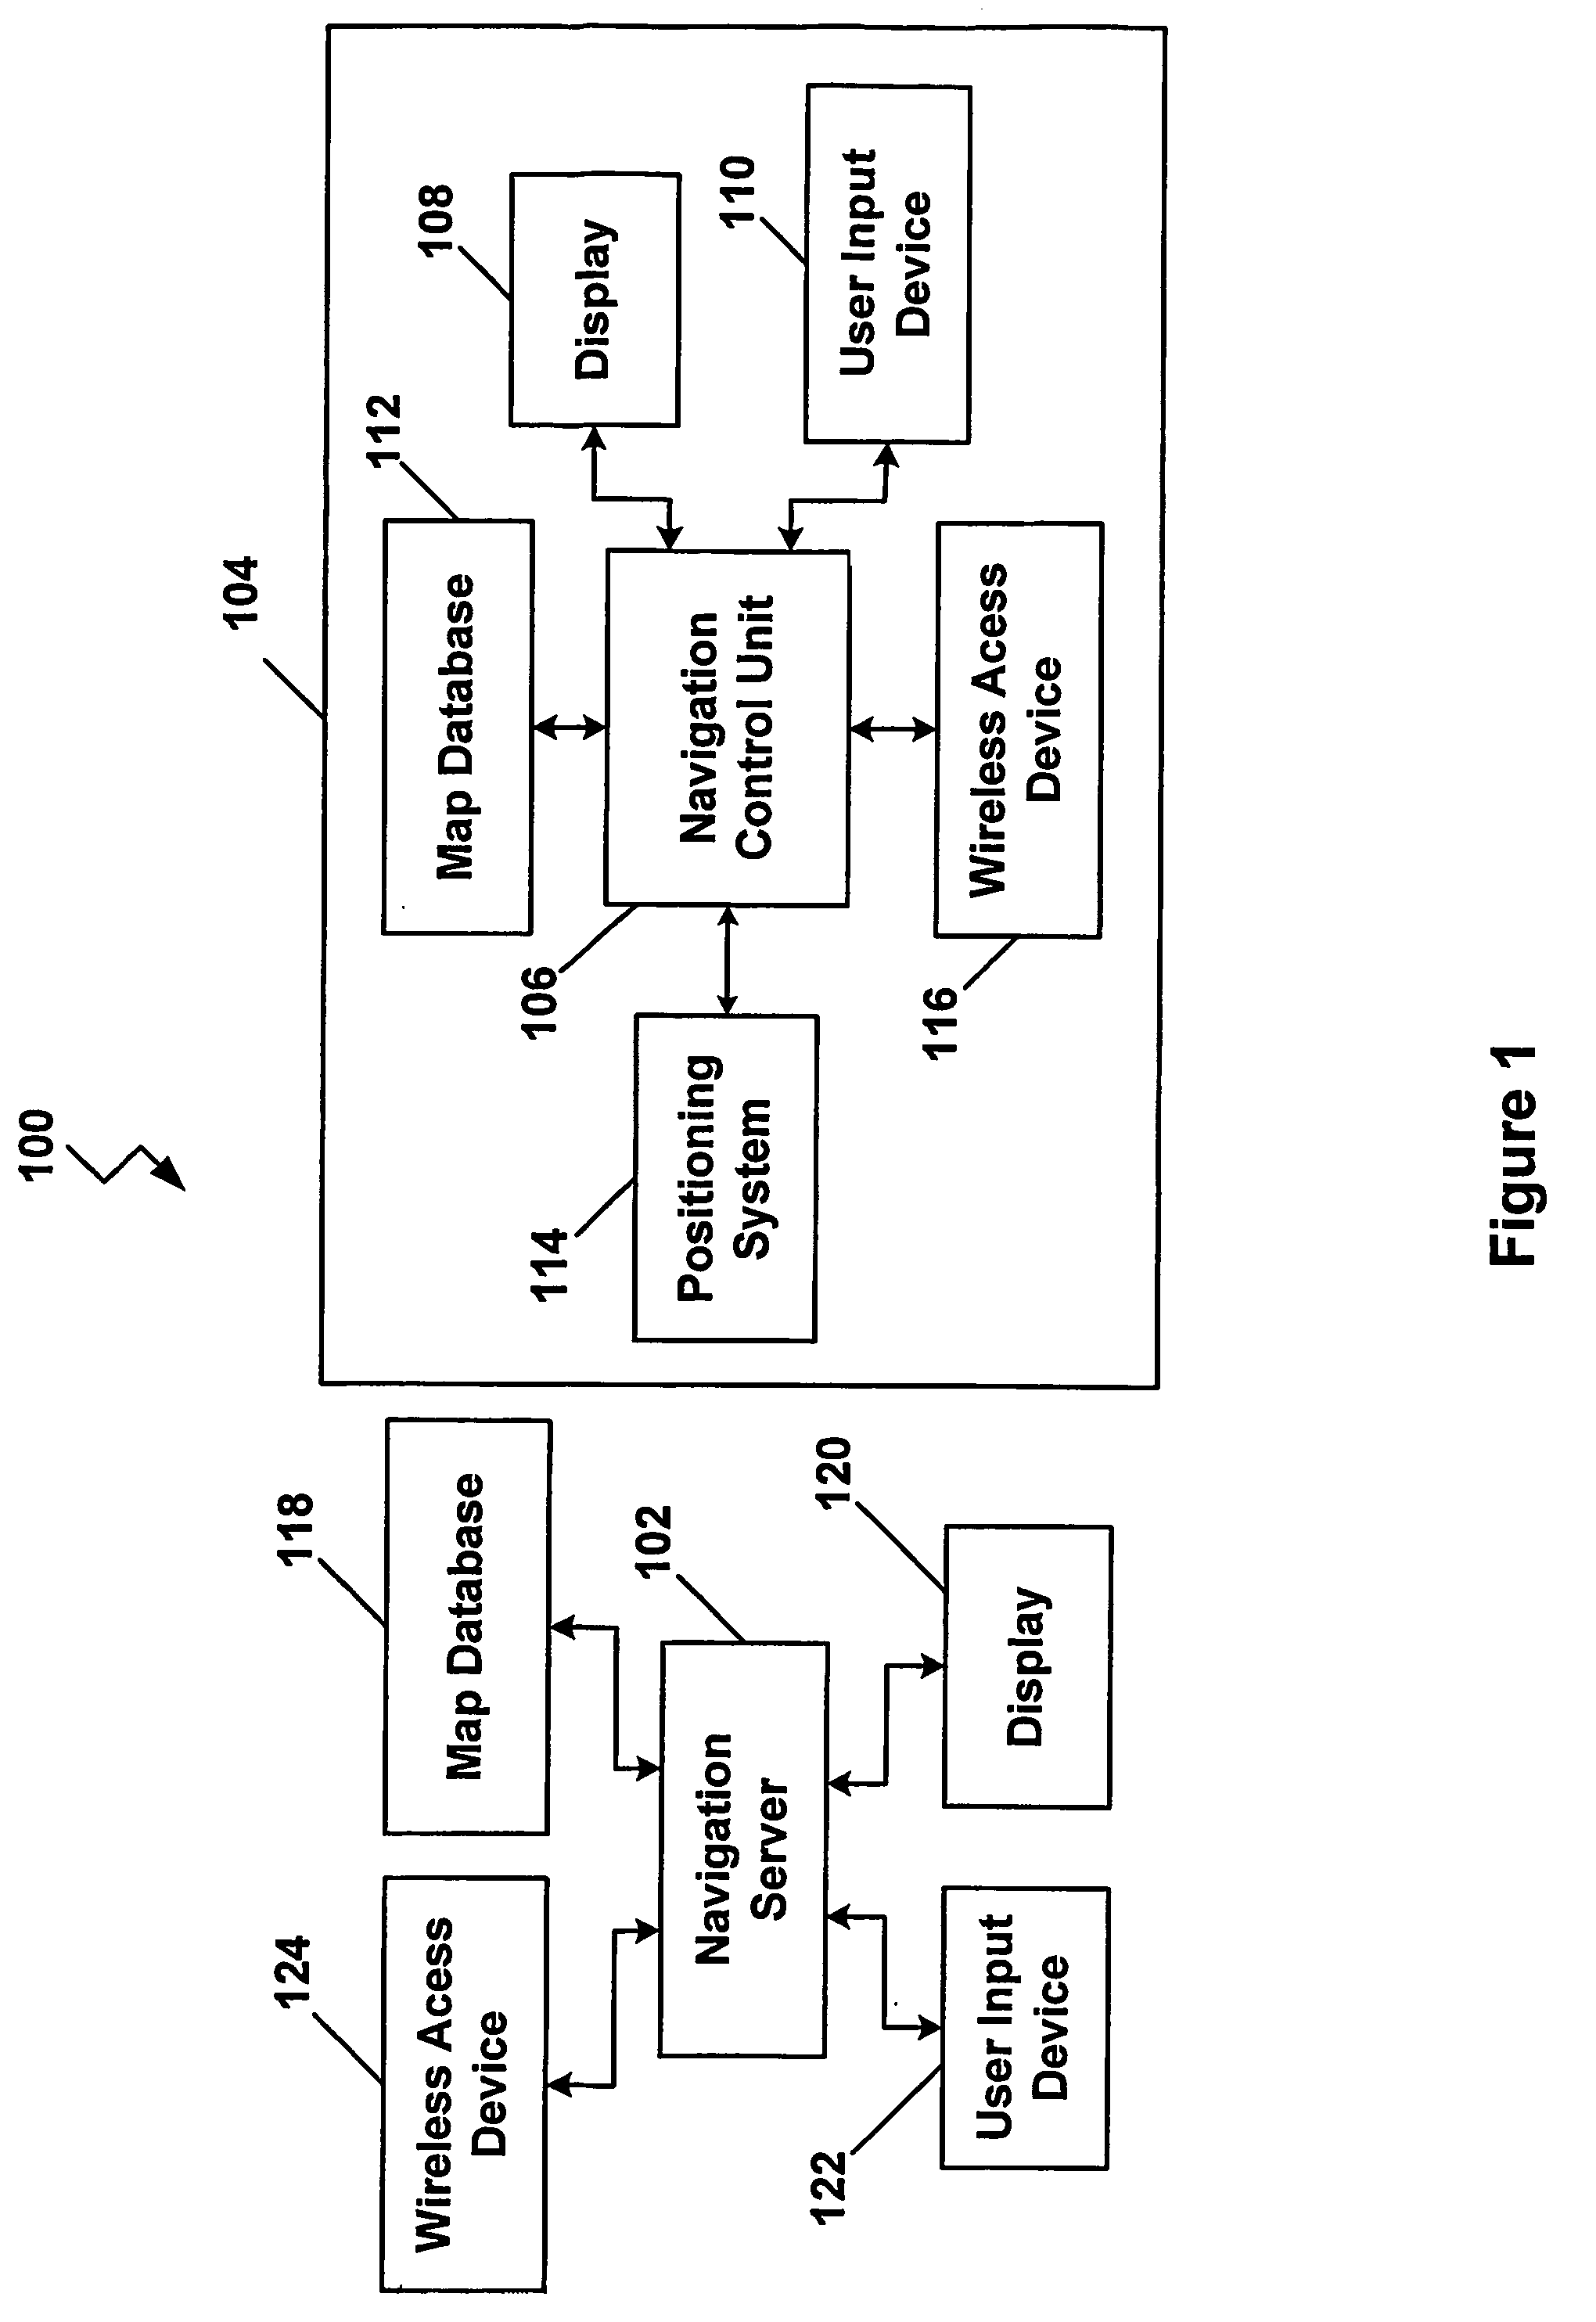 Transmission of special routes to a navigation device